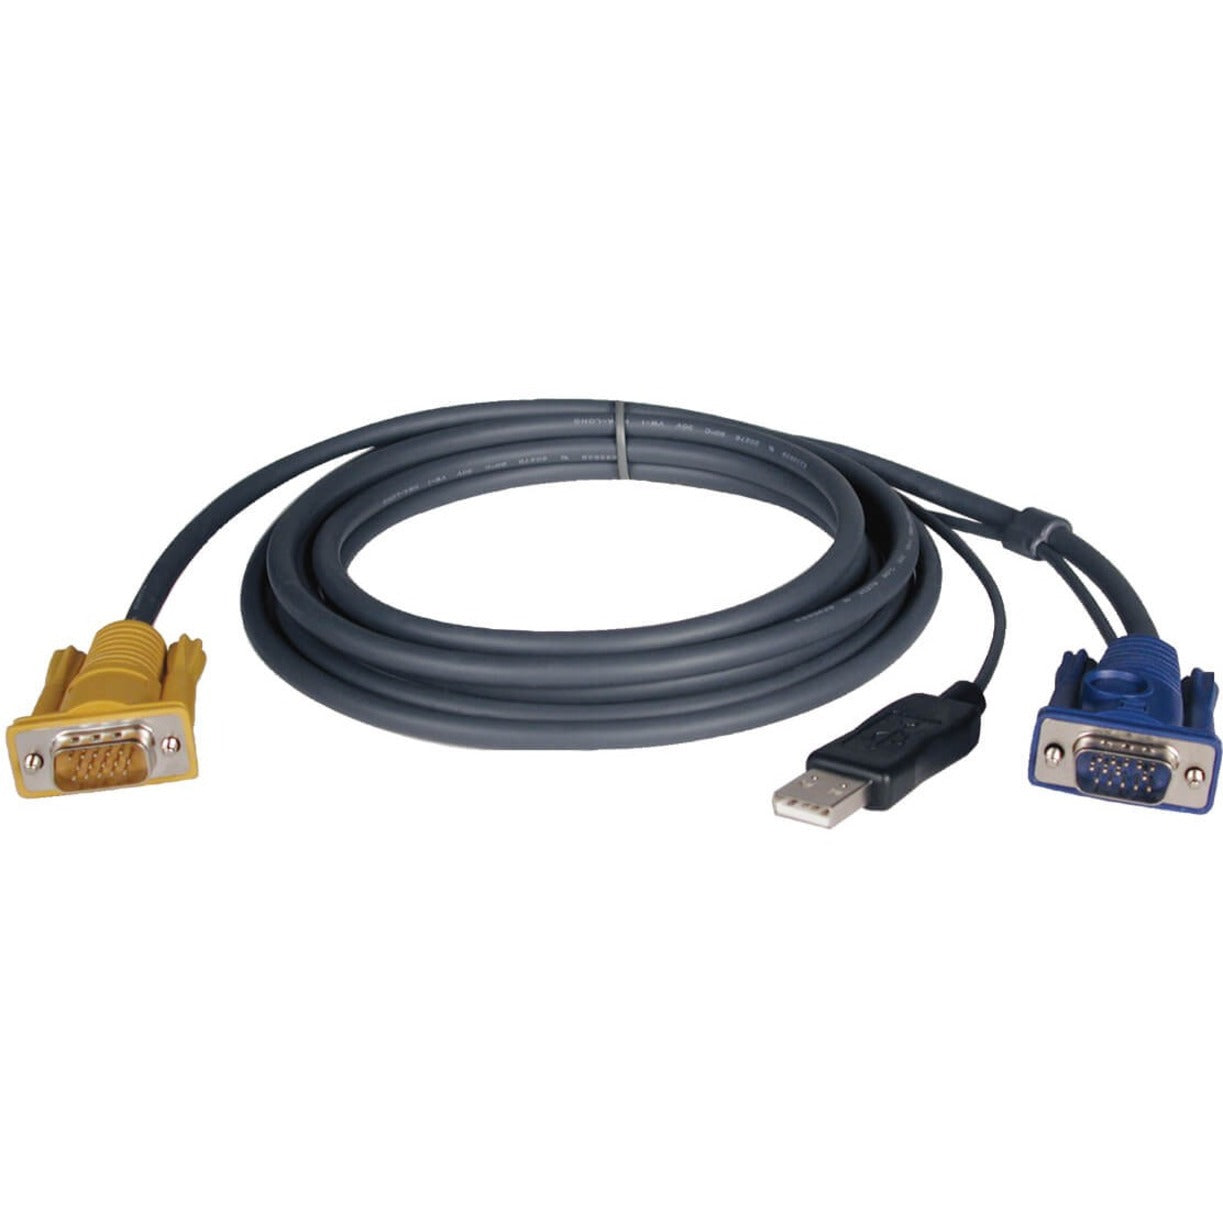 Tripp Lite P776-010 KVM Cable Kit, 10 ft USB Cable for NetDirector KVM Switches